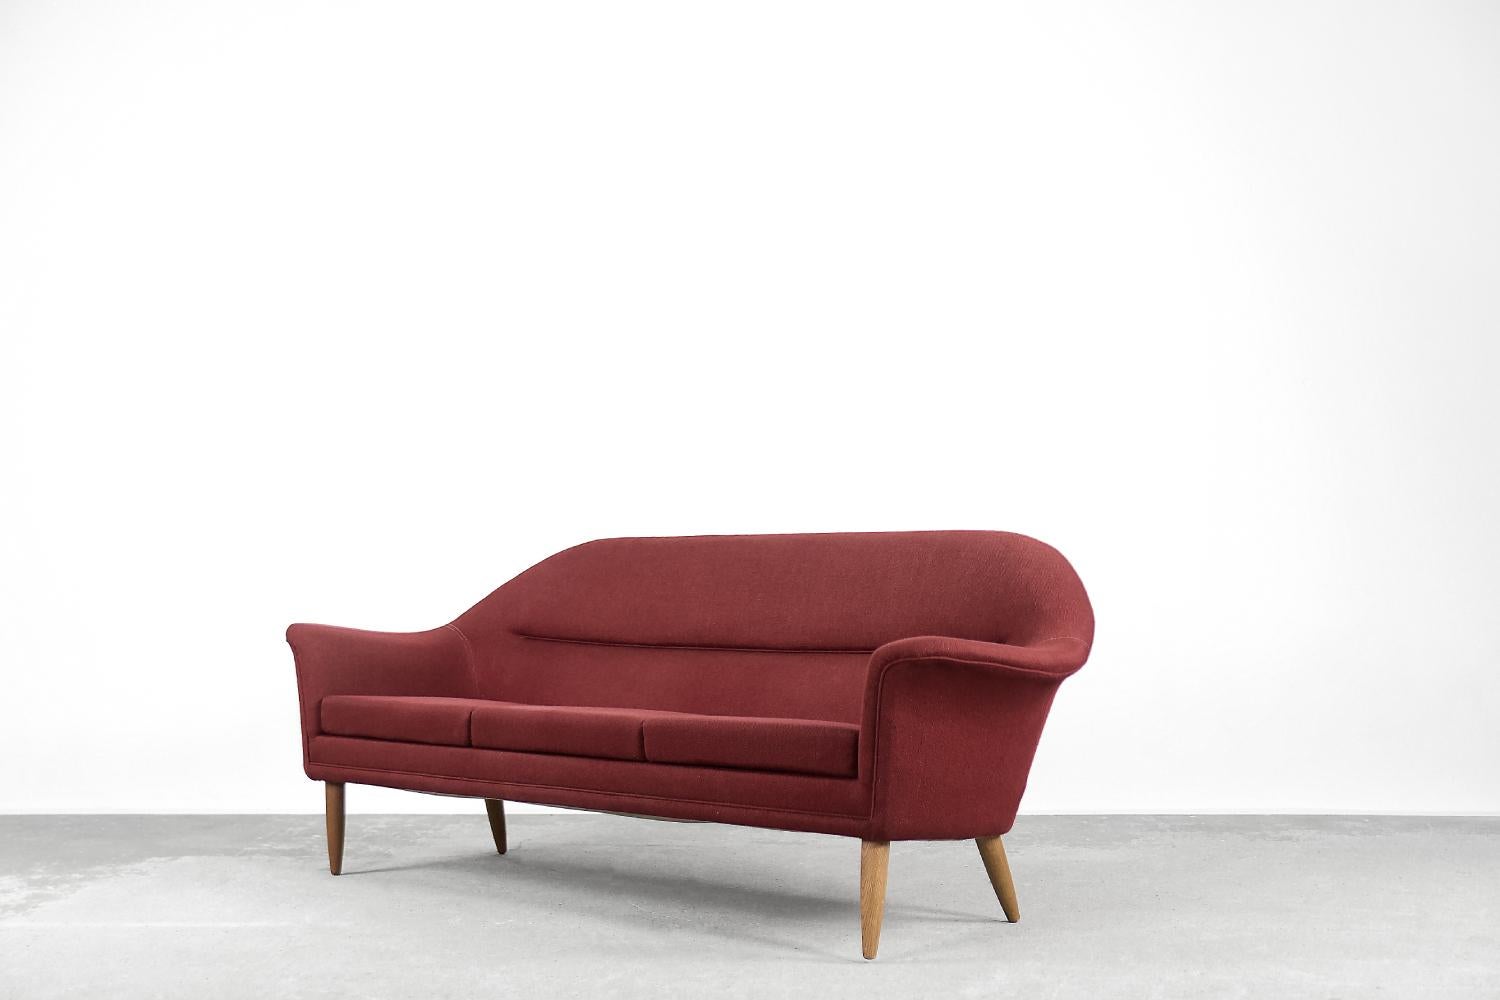 Vintage Scandinavian Mid-Century Modern Sofa from Bröderna Andersson, 1950s In Good Condition For Sale In Warszawa, Mazowieckie